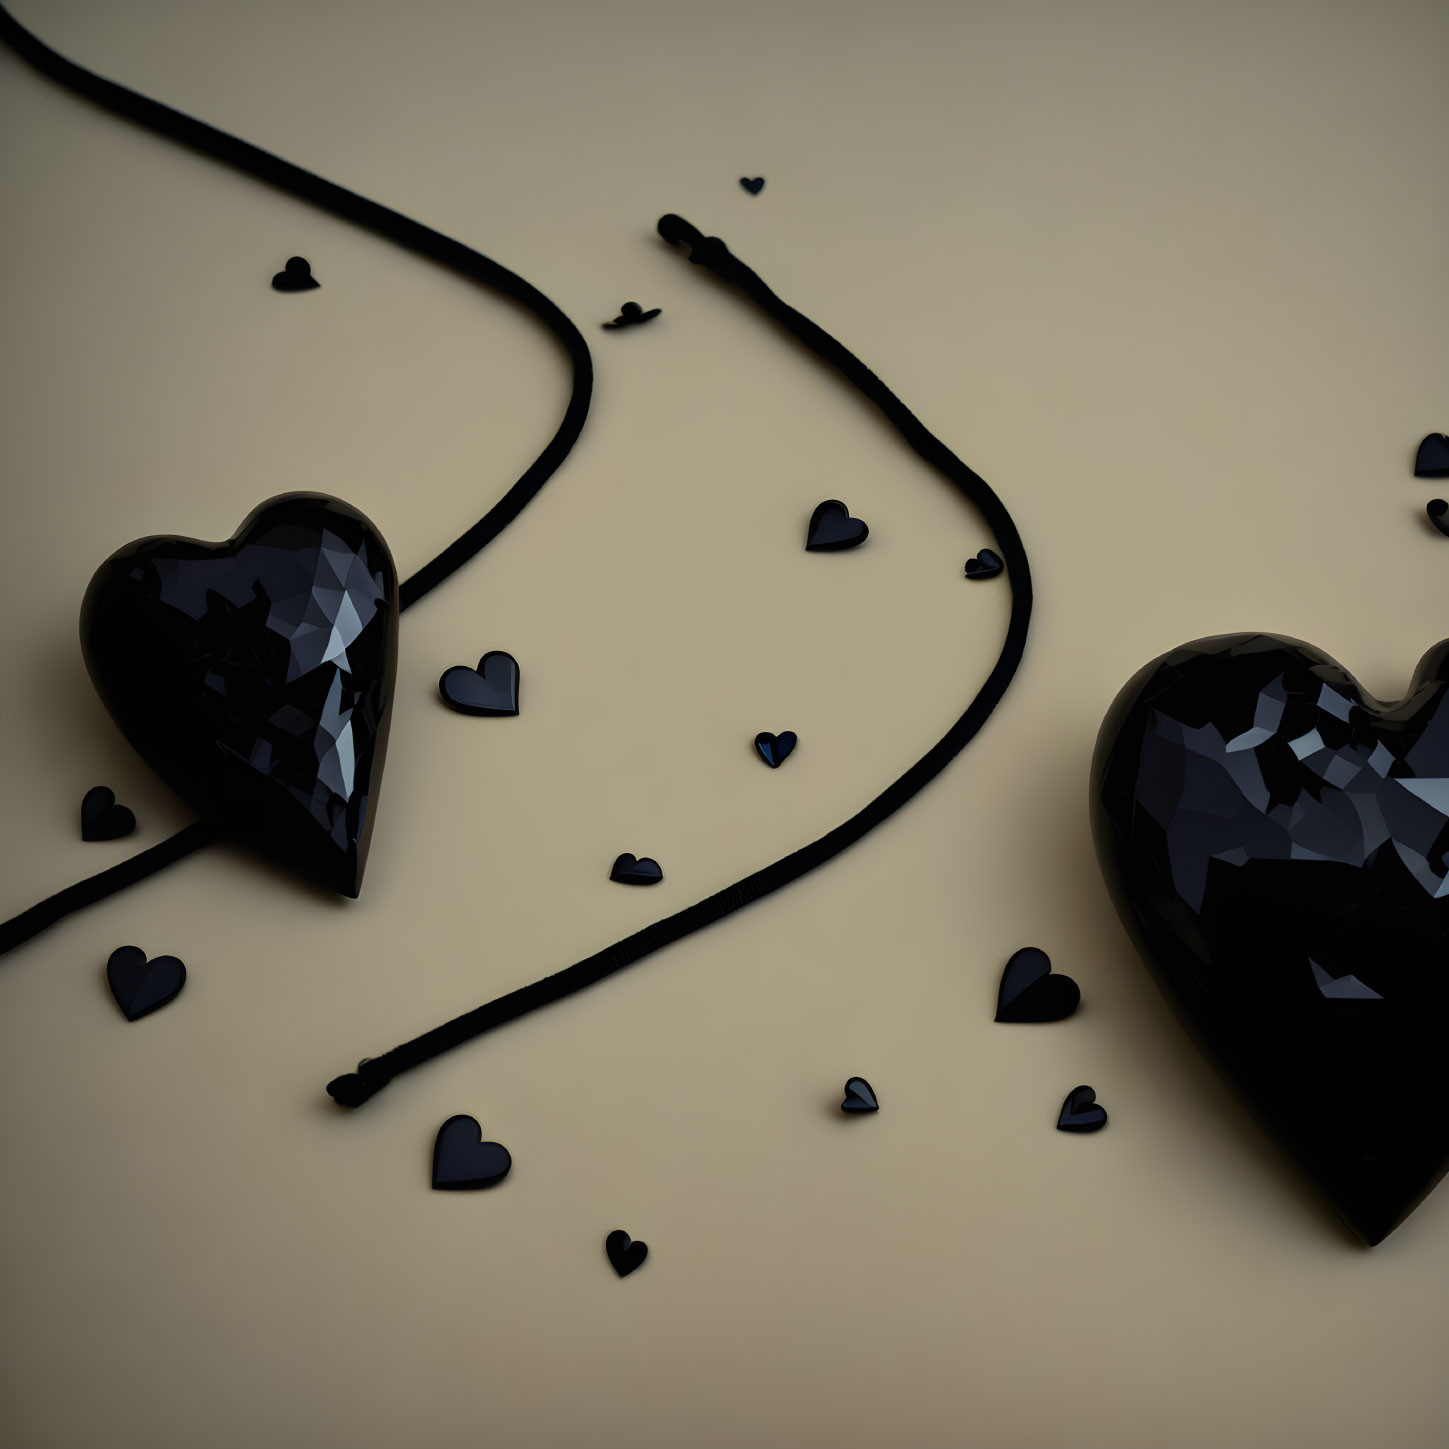 Glossy Heart-Shaped Objects Connected by Cord on Beige Background